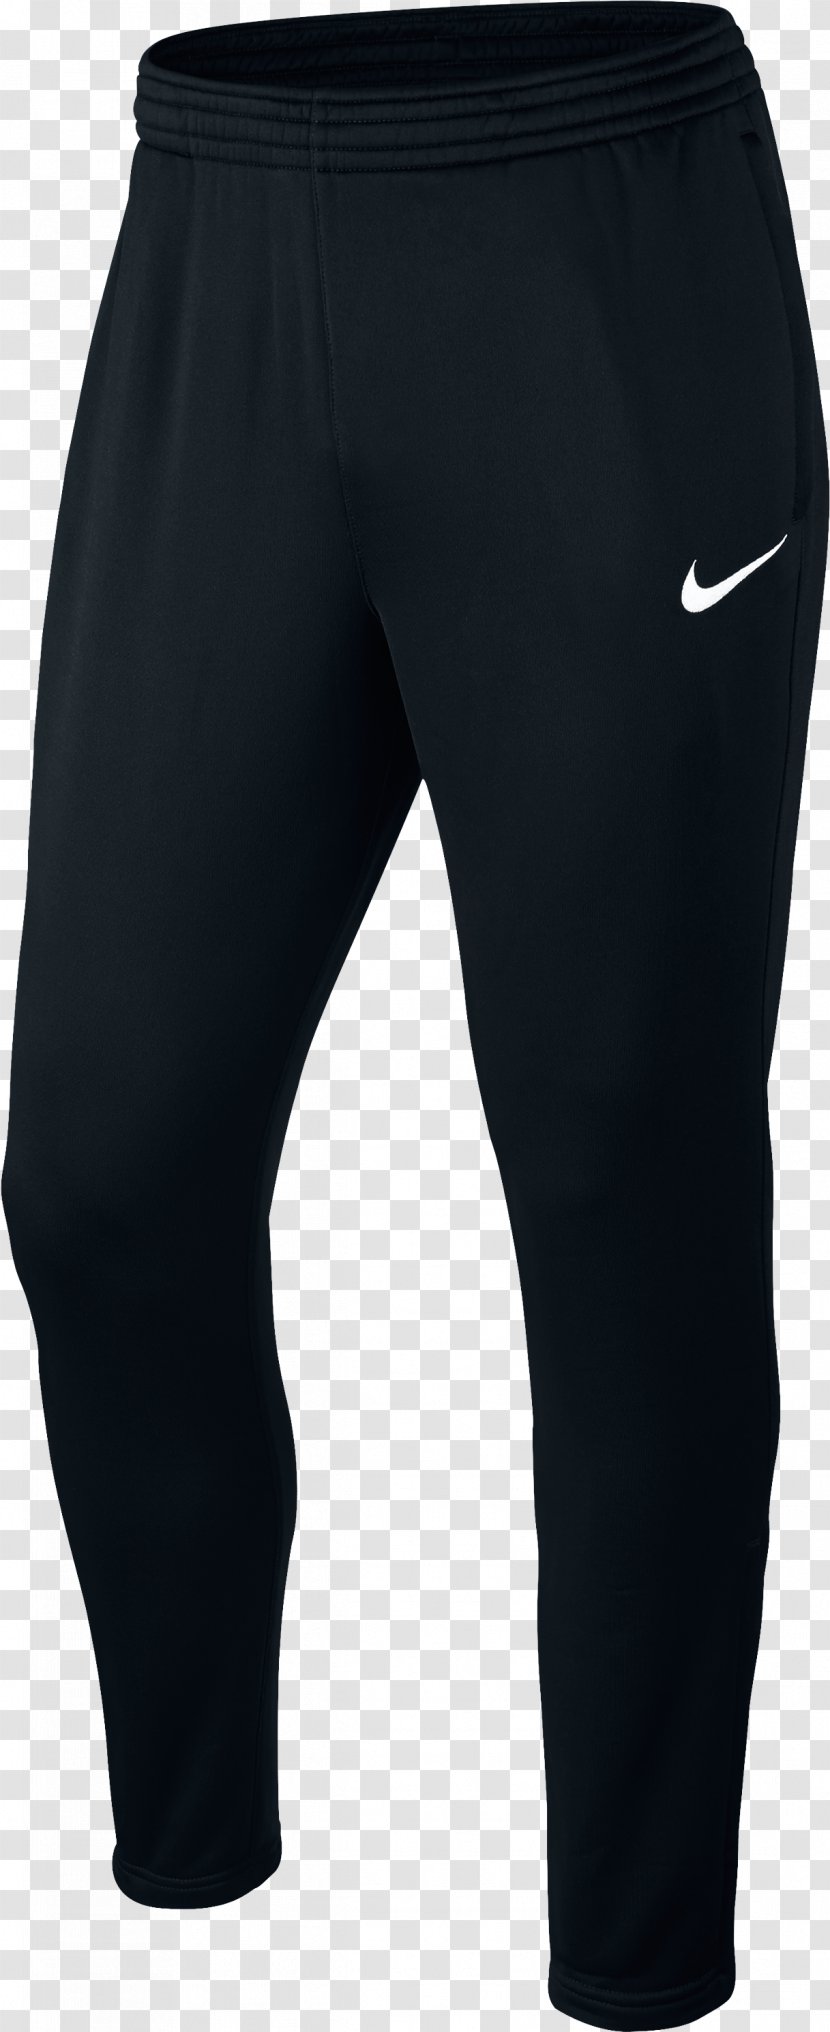 Nike Sweatpants Clothing Tights - Waist Transparent PNG